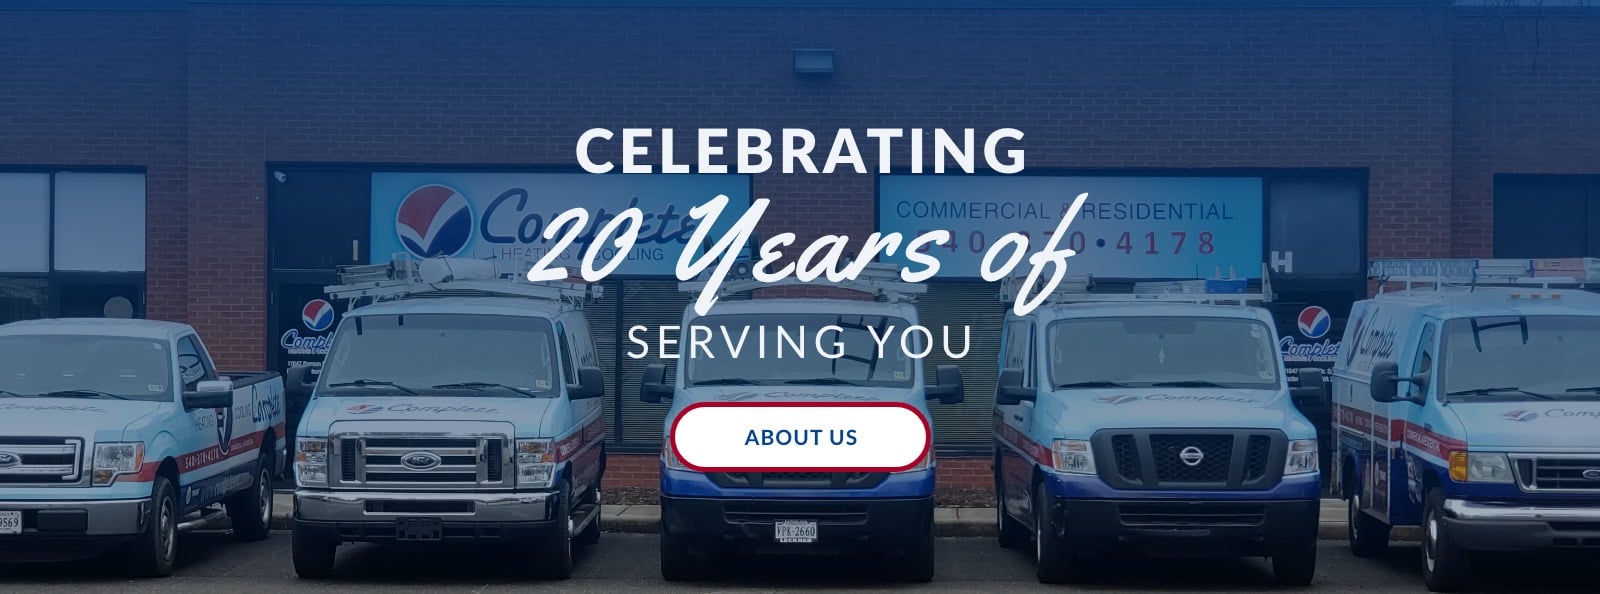 Celebrating 20 Years of Serving You